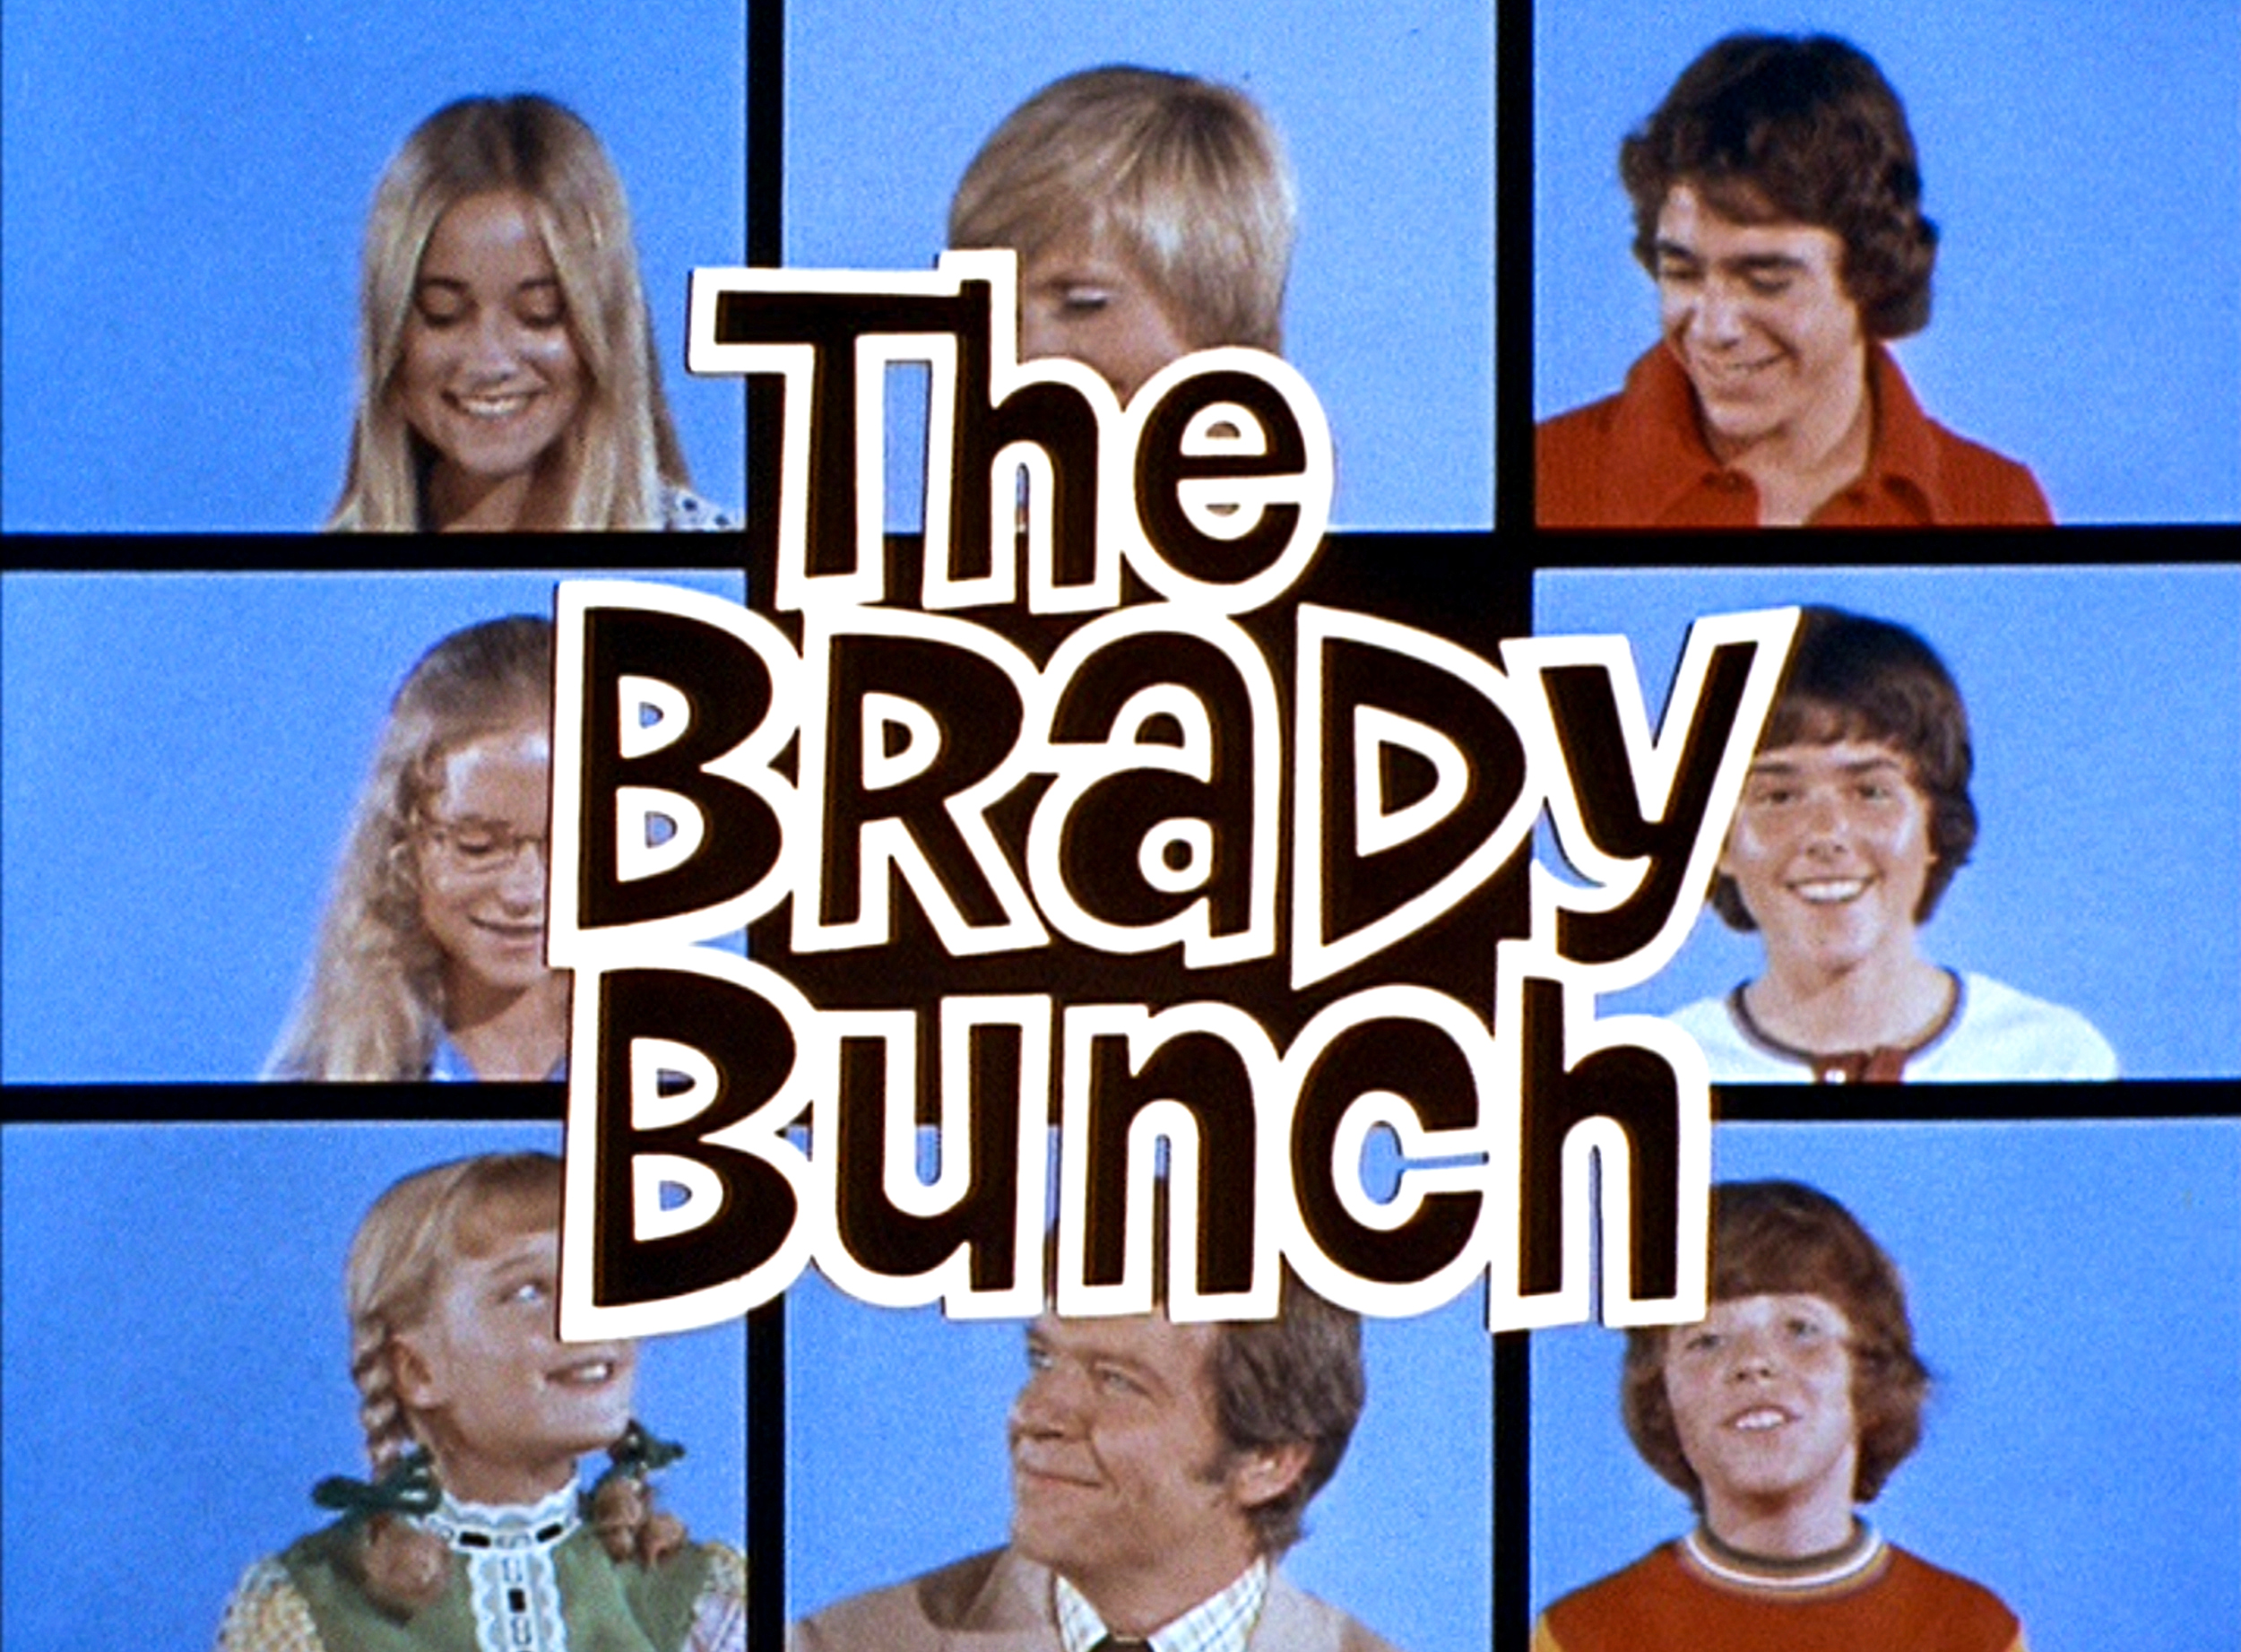 The logo from The Brady Bunch